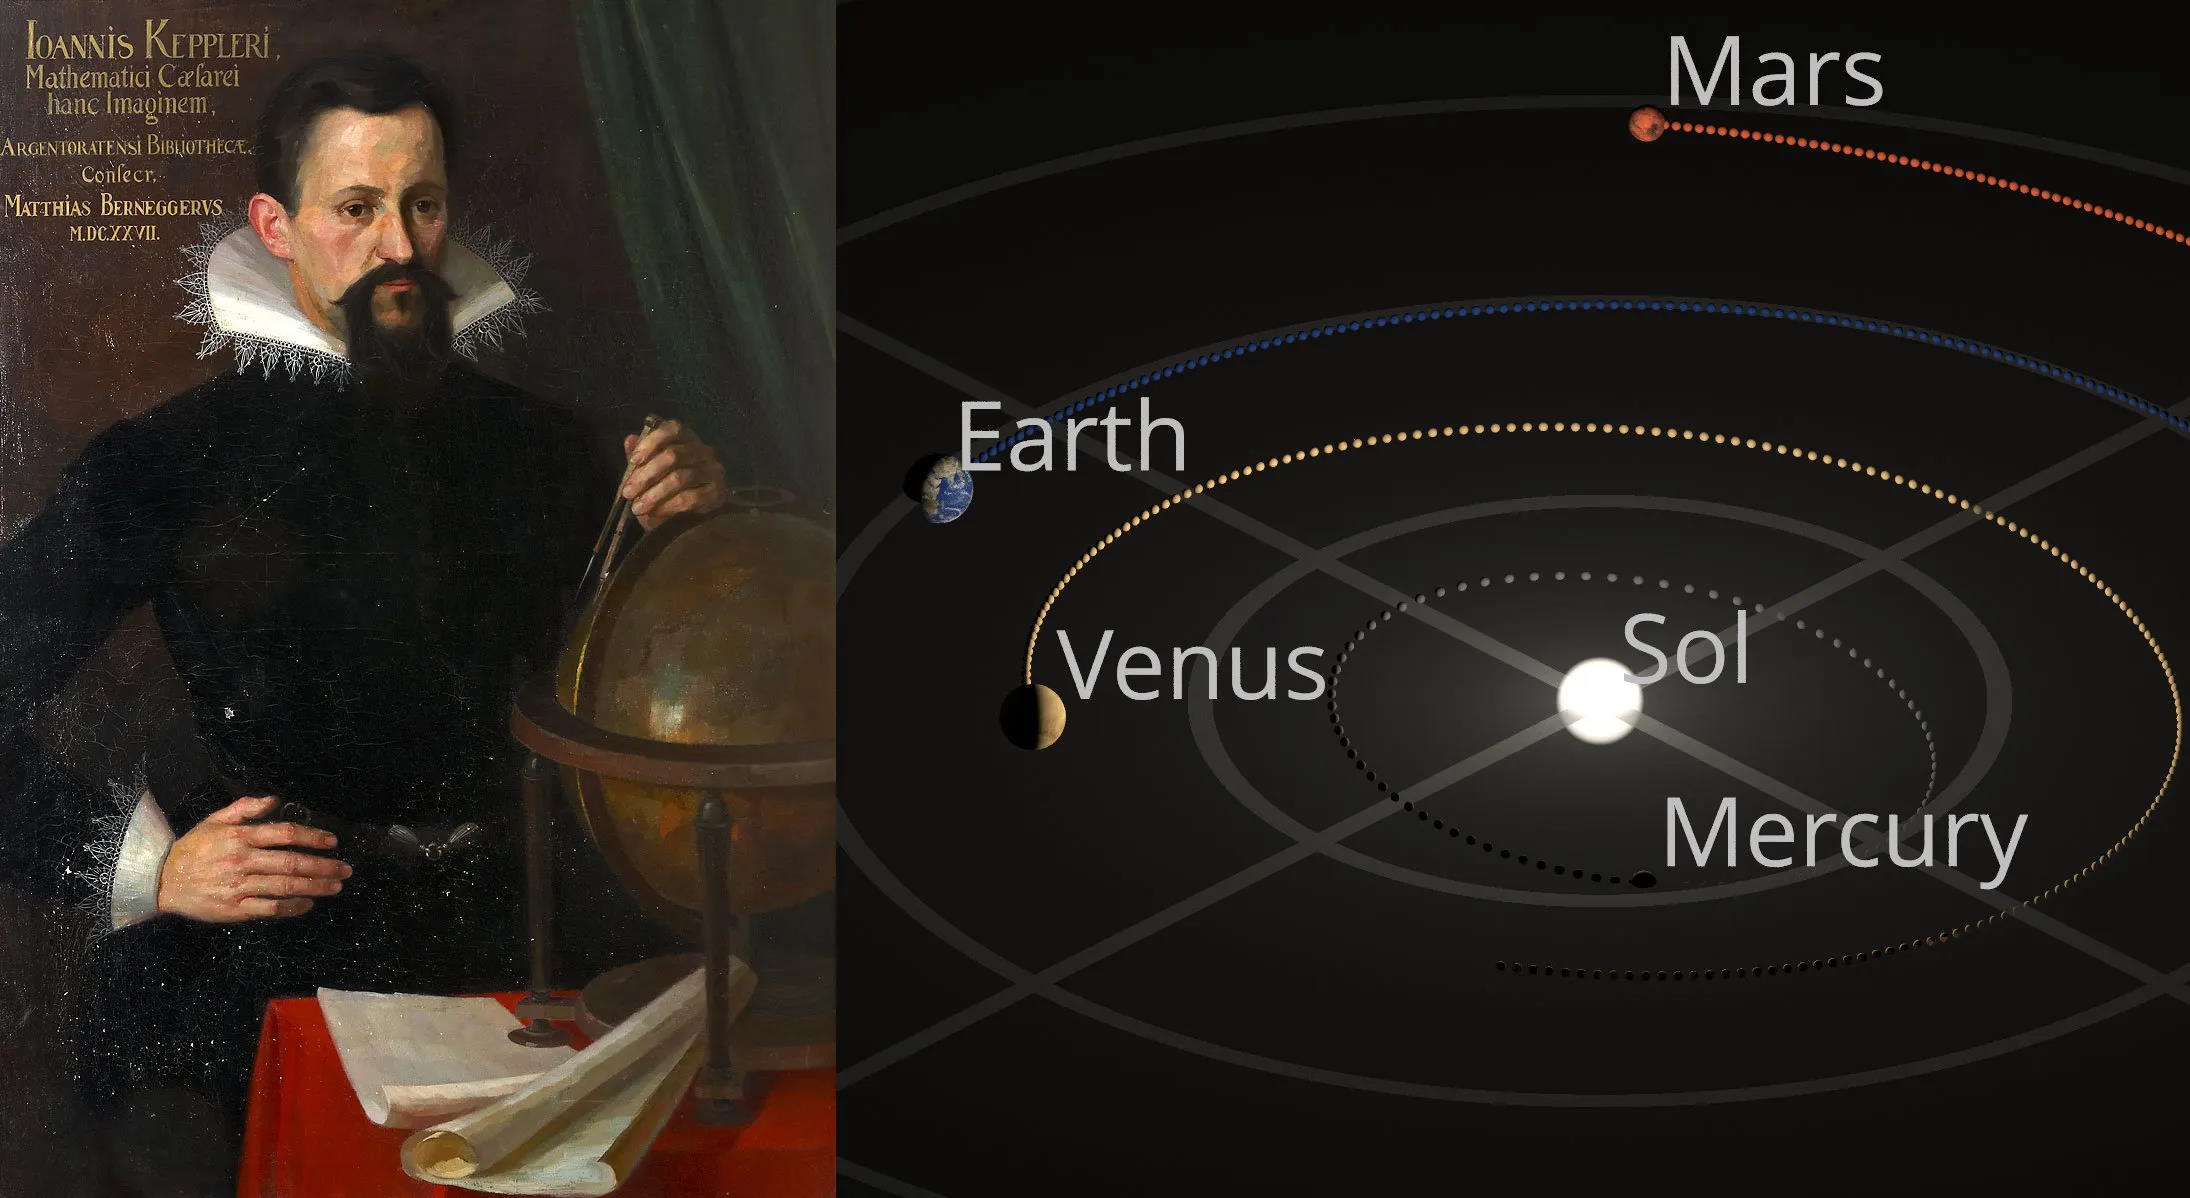 A diagram of the solar system with the sun, earth, and uranus.